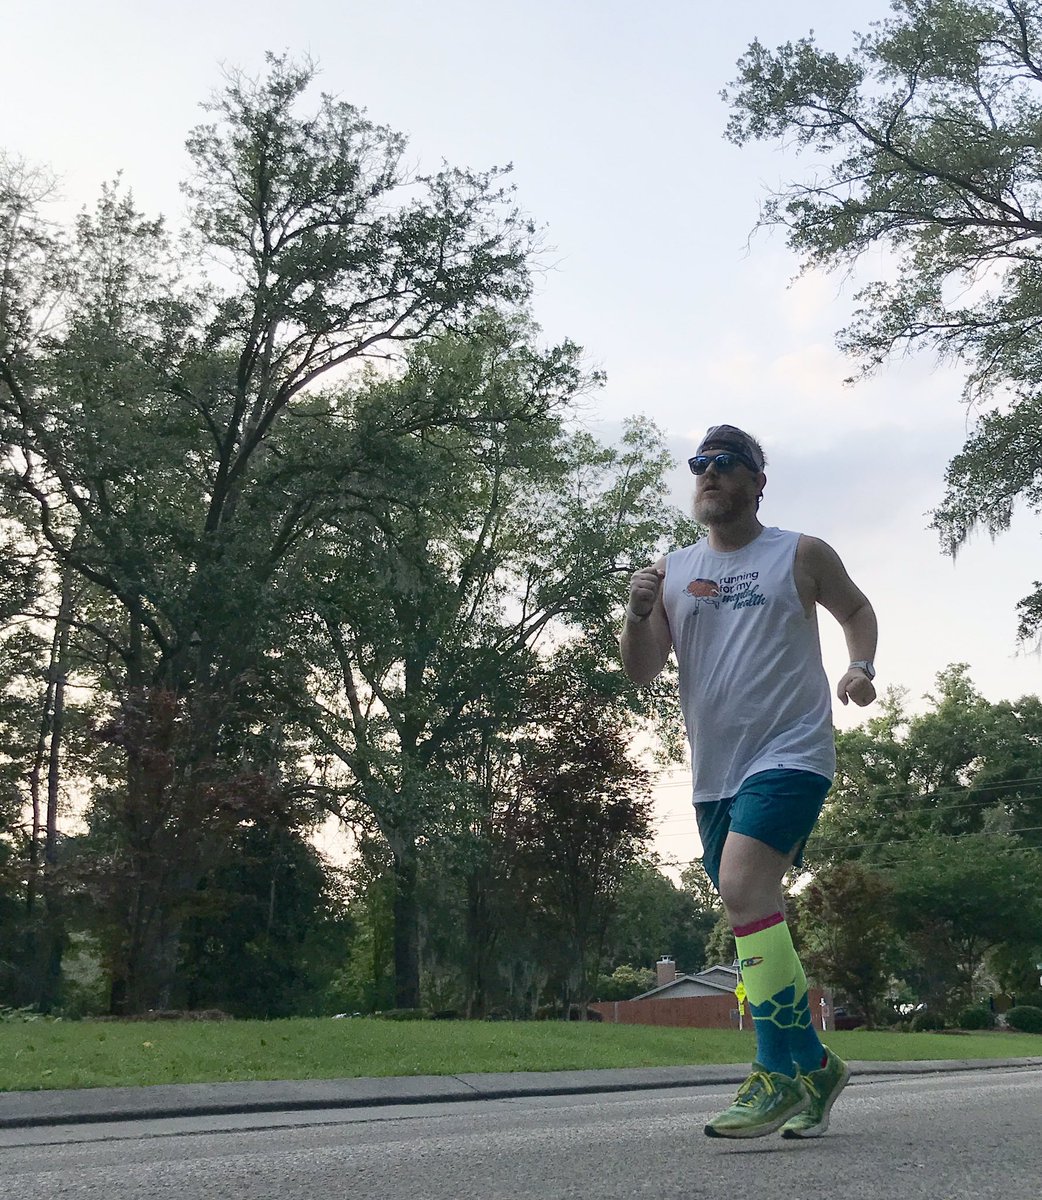 You can’t run away from all of the things, but you can put some distance on them.

4.1 miles. #SIRunStreak24 Day 9. 🧠 

#IStandWithYou #StillIRun #teamnuun #HSHive #PROAlumni #SquirrelsNutButter #shokzstar #TeamROADiD #TeamULTRA #LeagueOfGarmin #RunChat #WeRunSocial

1)